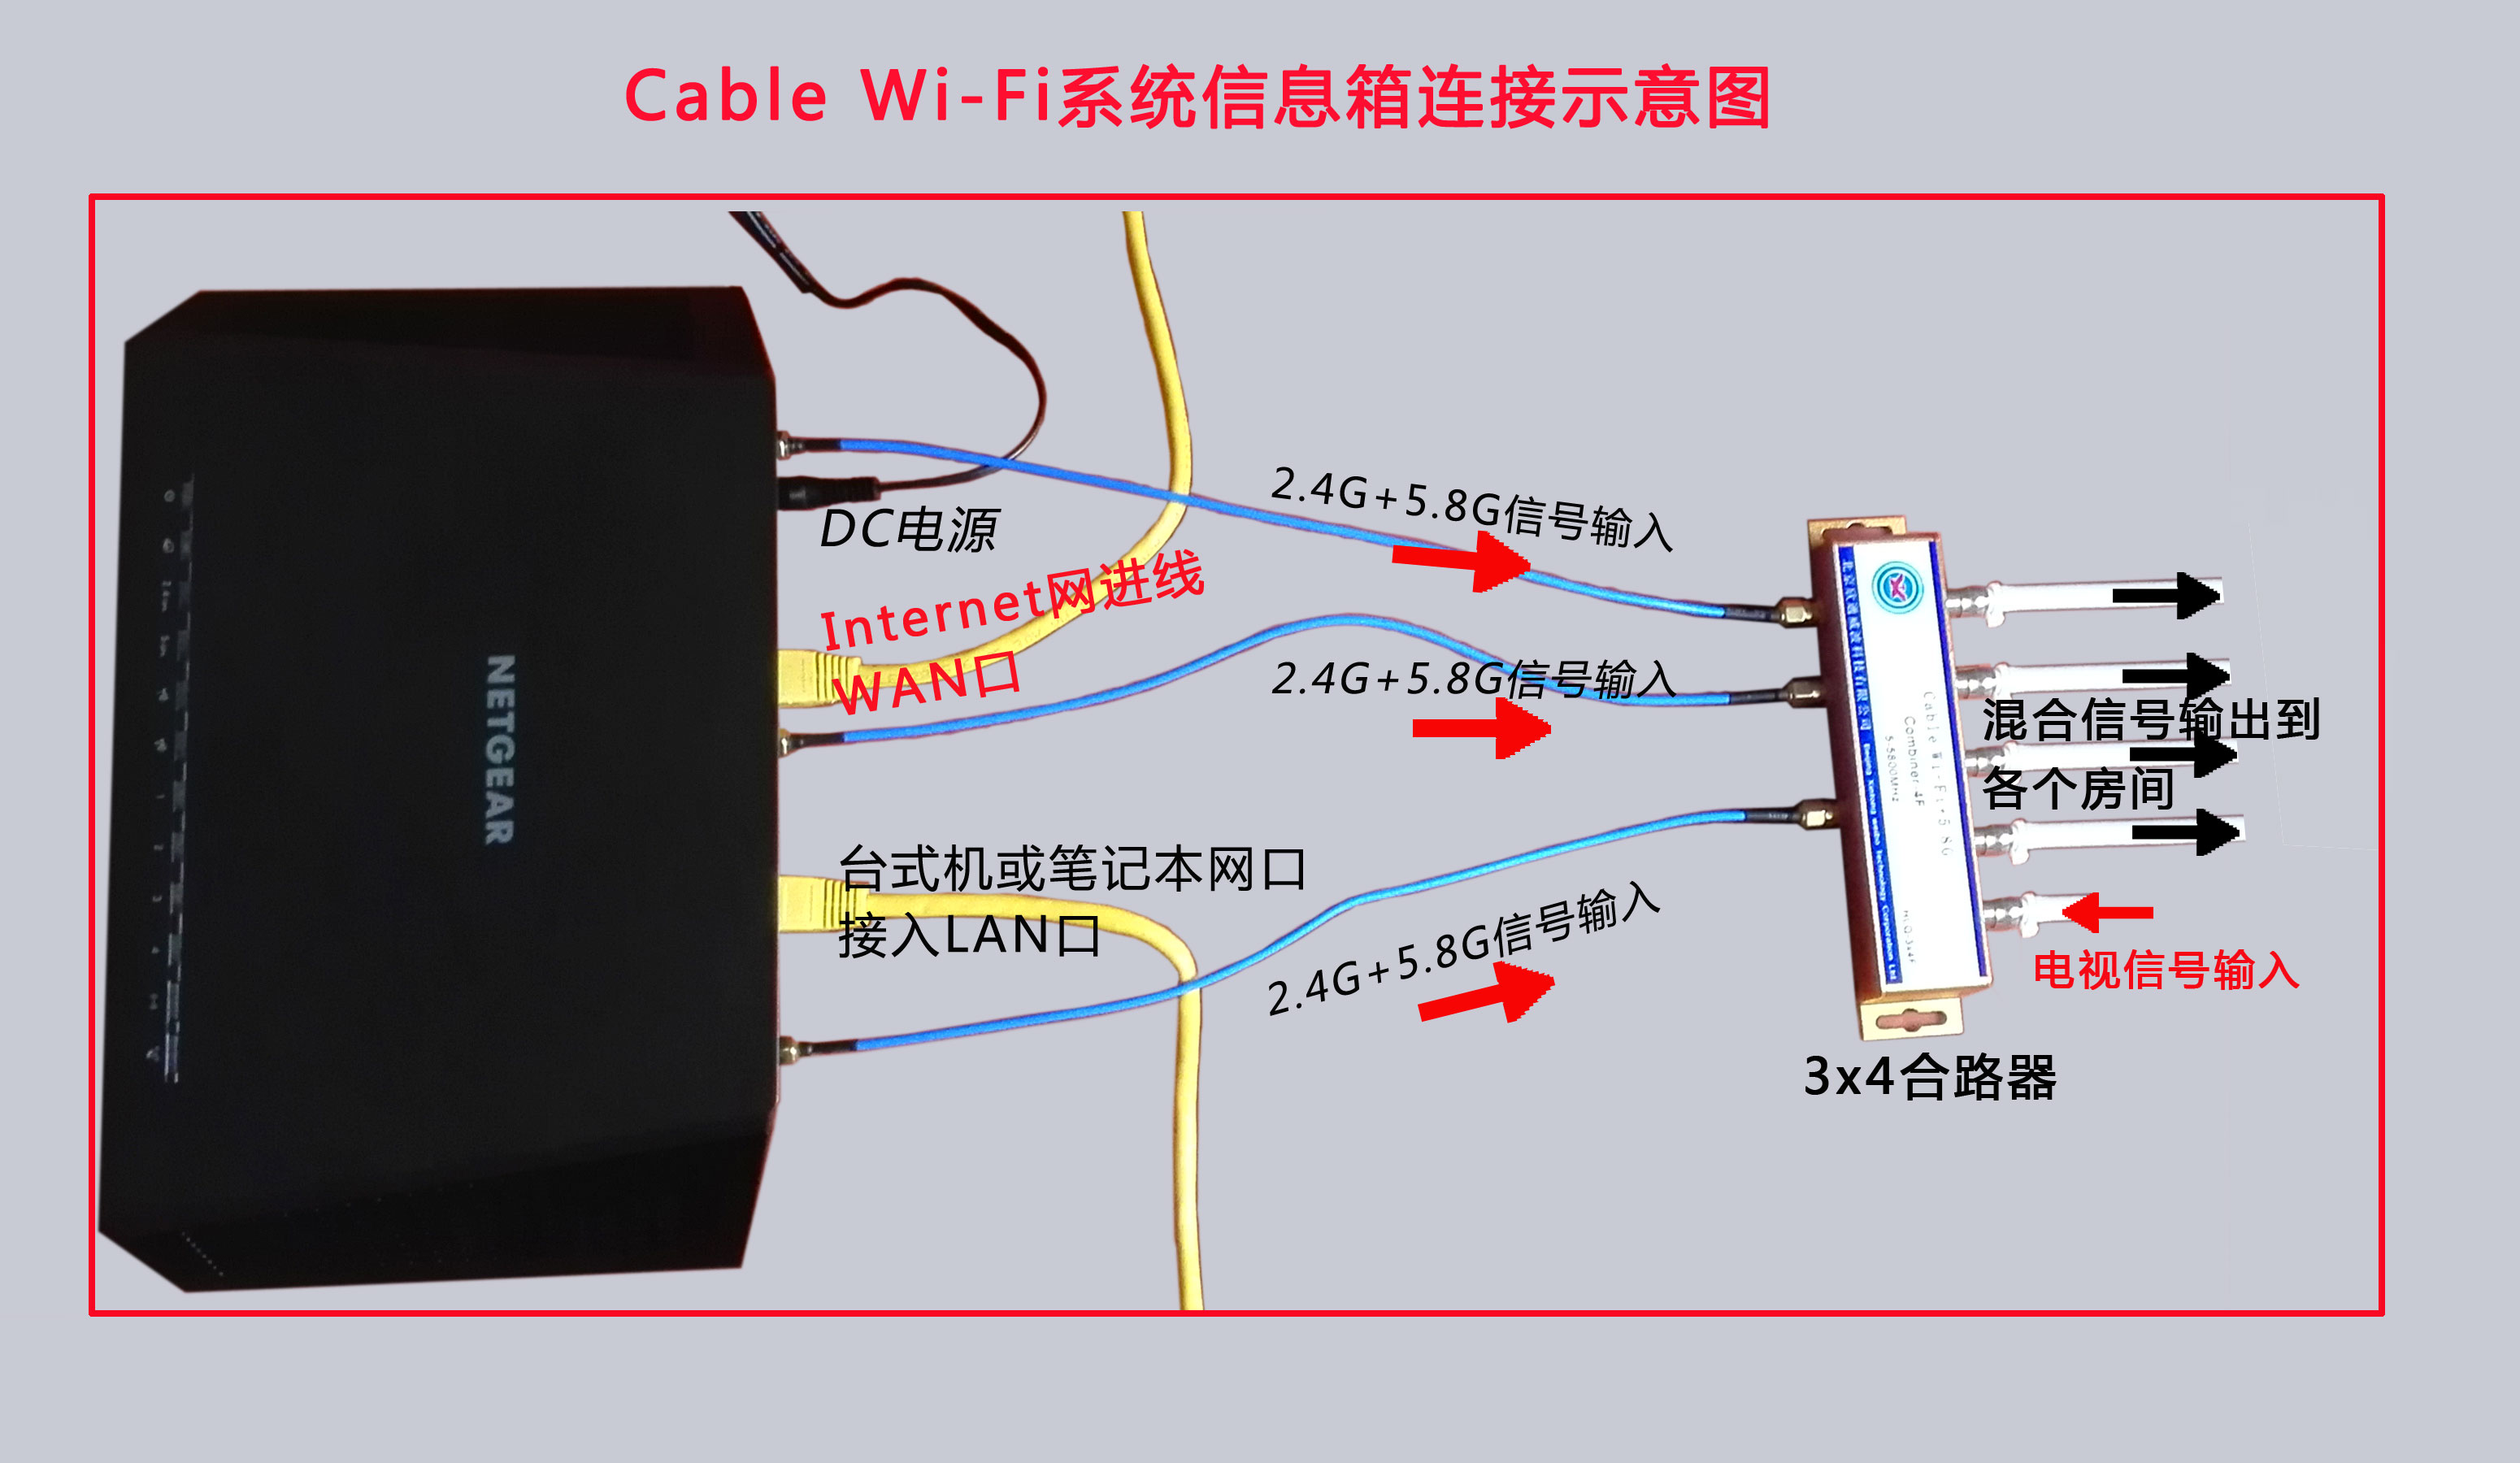 Cable Wi-Fi(802.11ac)+4G